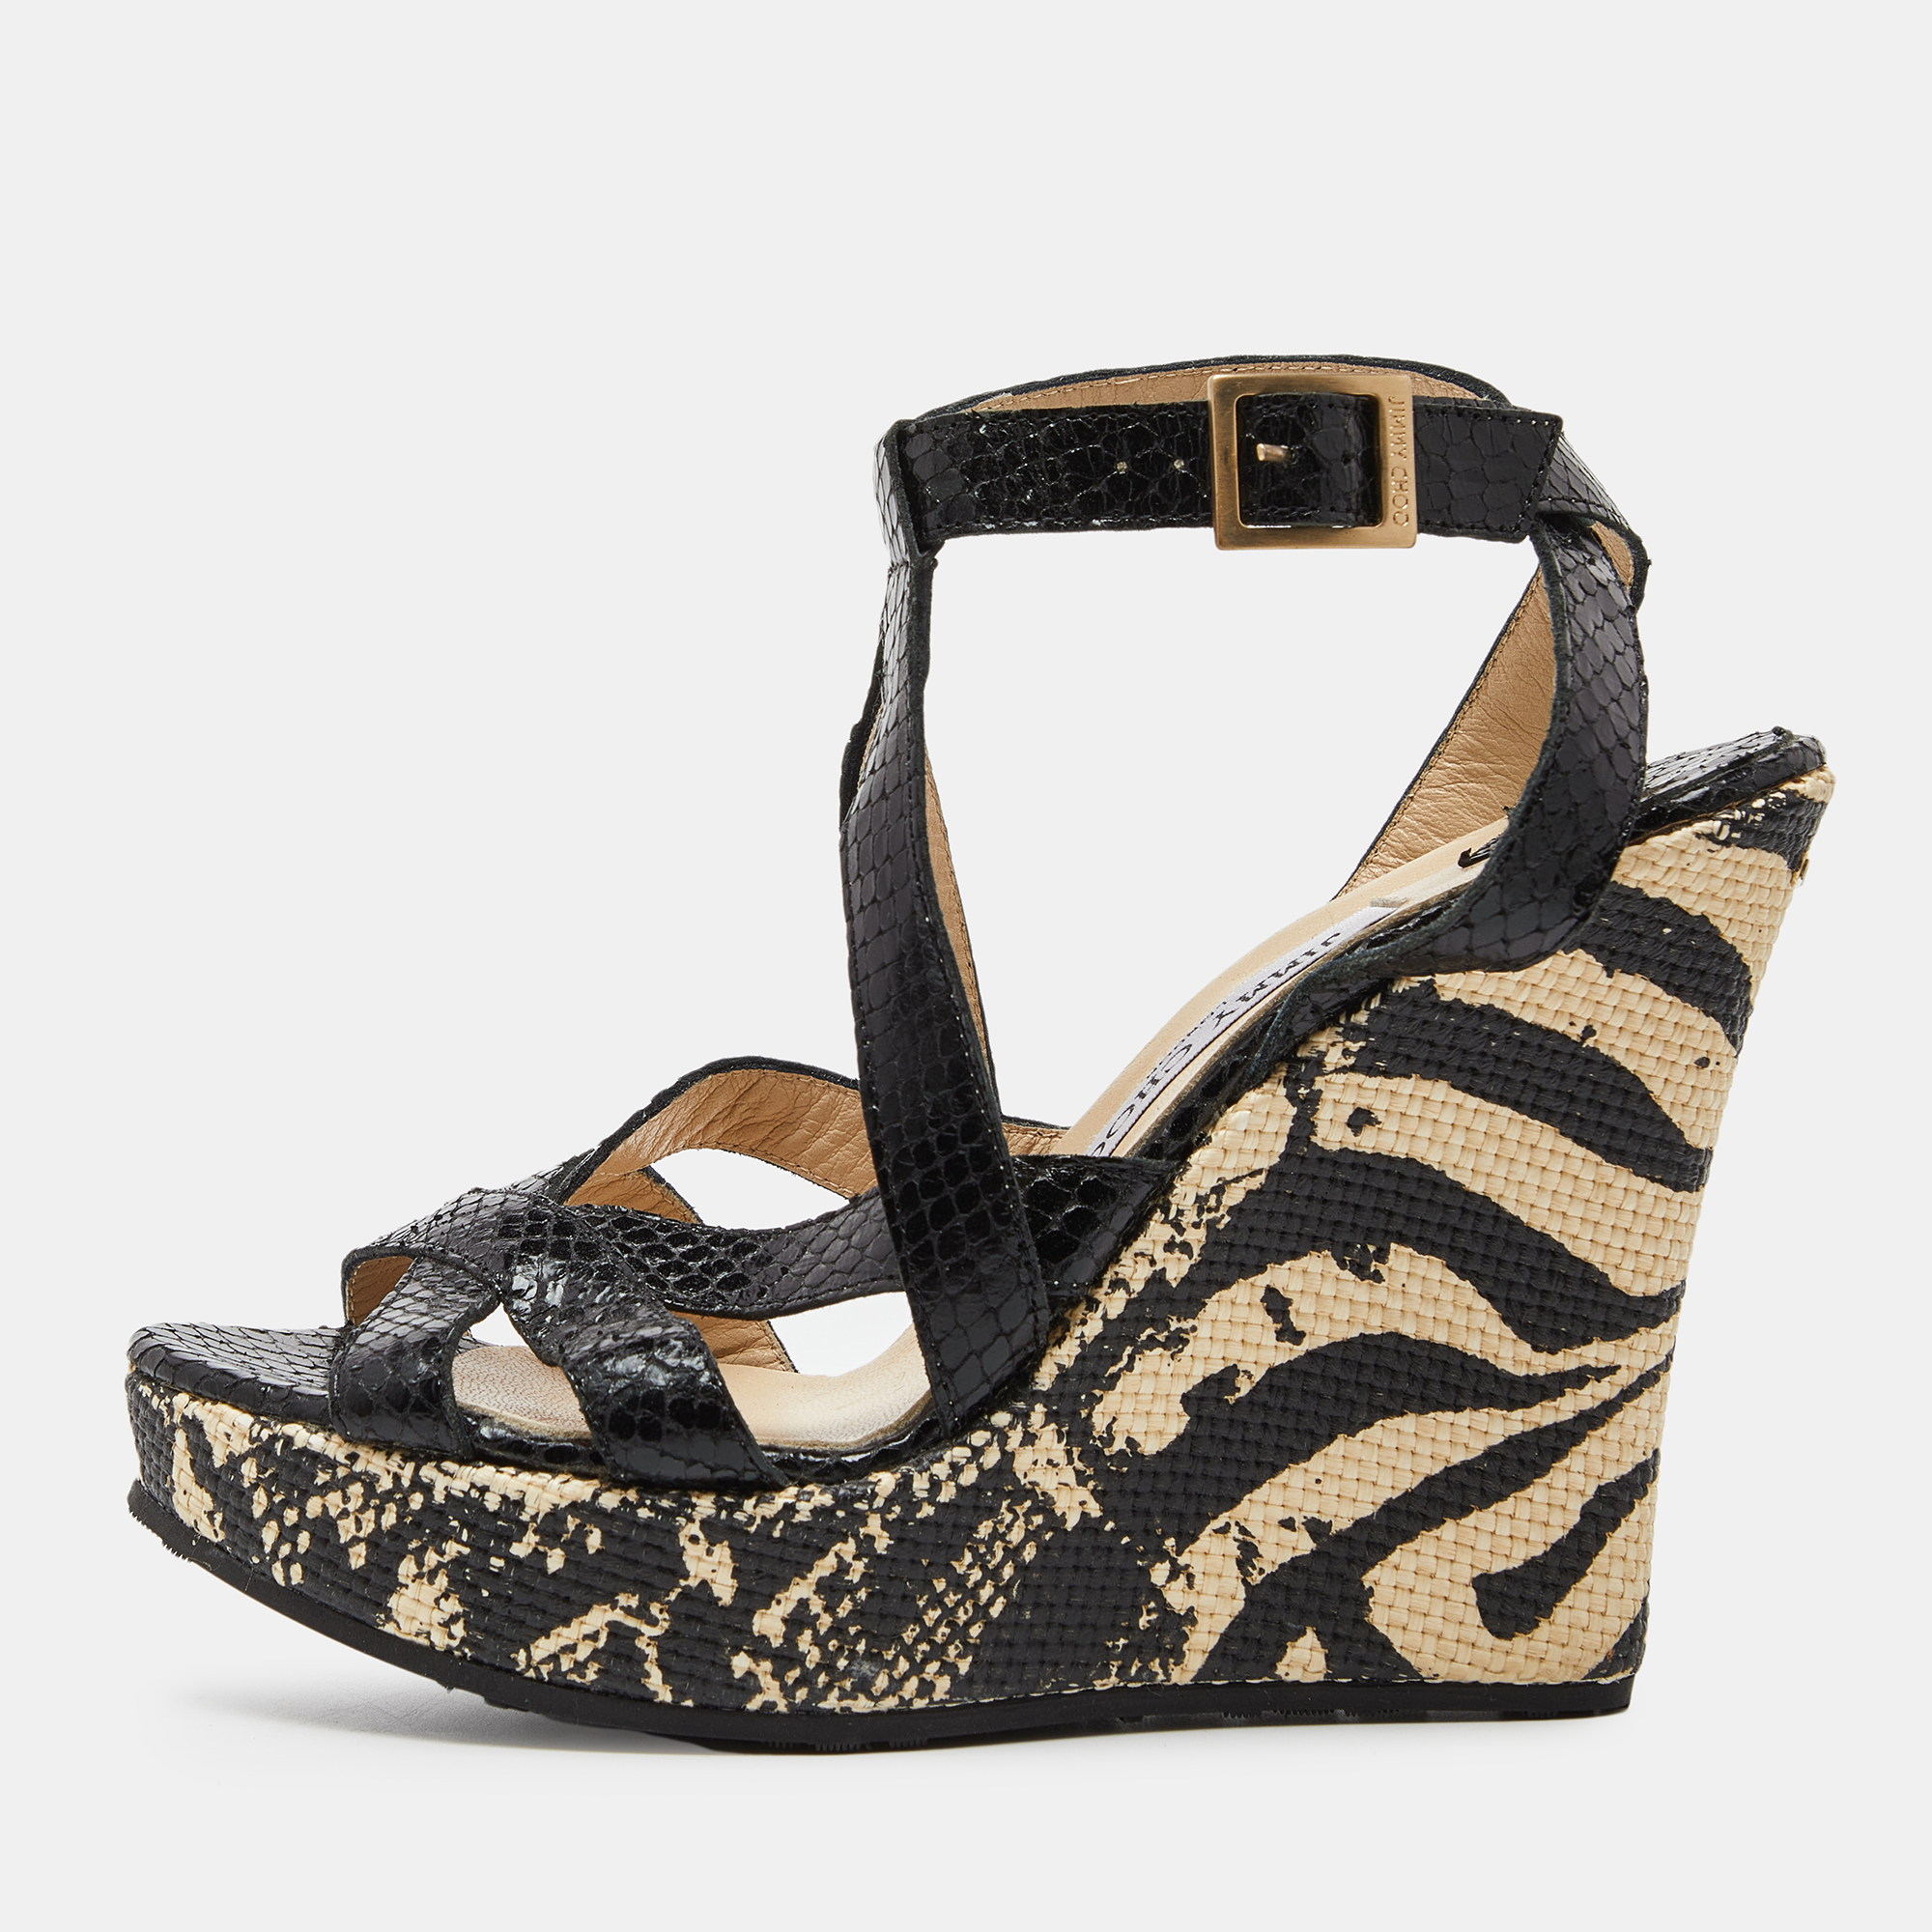 Whether youre into high style comfort or both these lovely wedges will never disappoint. They feature a chic silhouette and an eye pleasing hue. Make this pair yours today